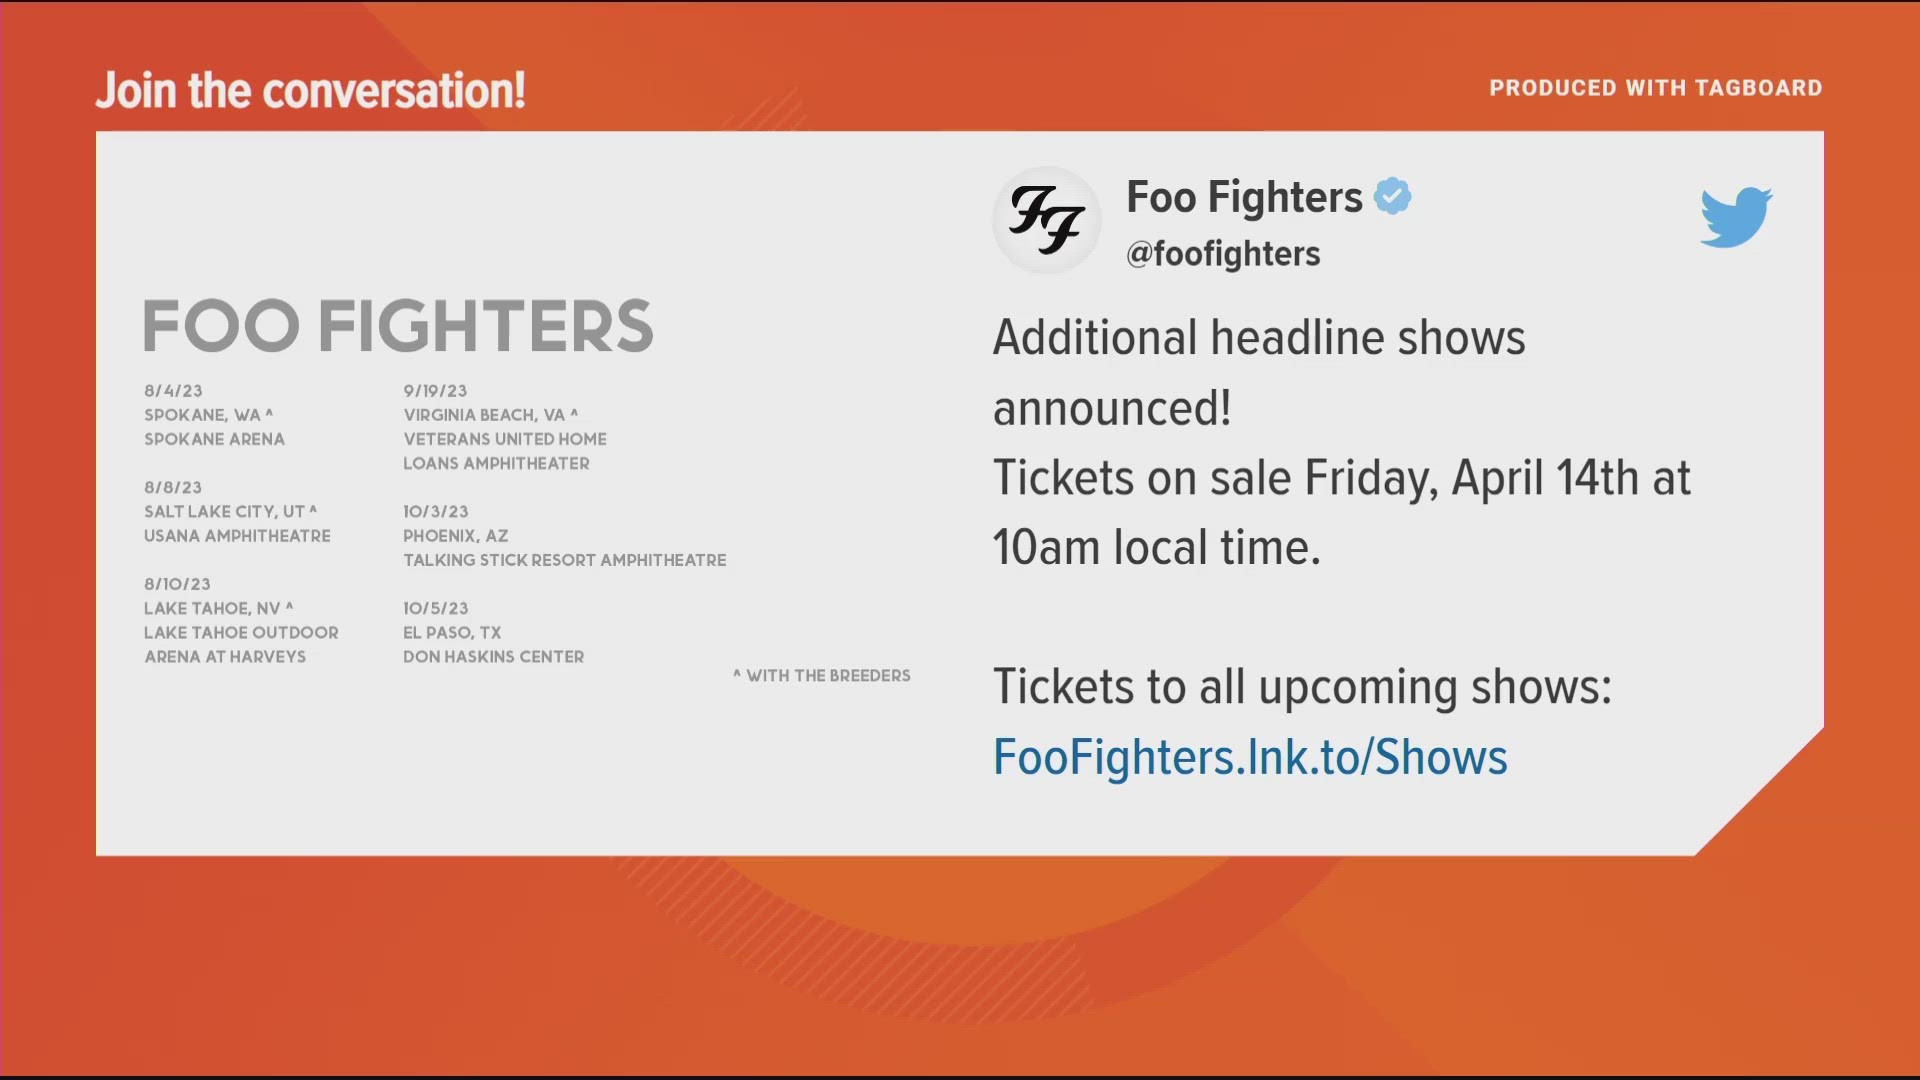 Foo Fighters will come to Spokane Arena this August.